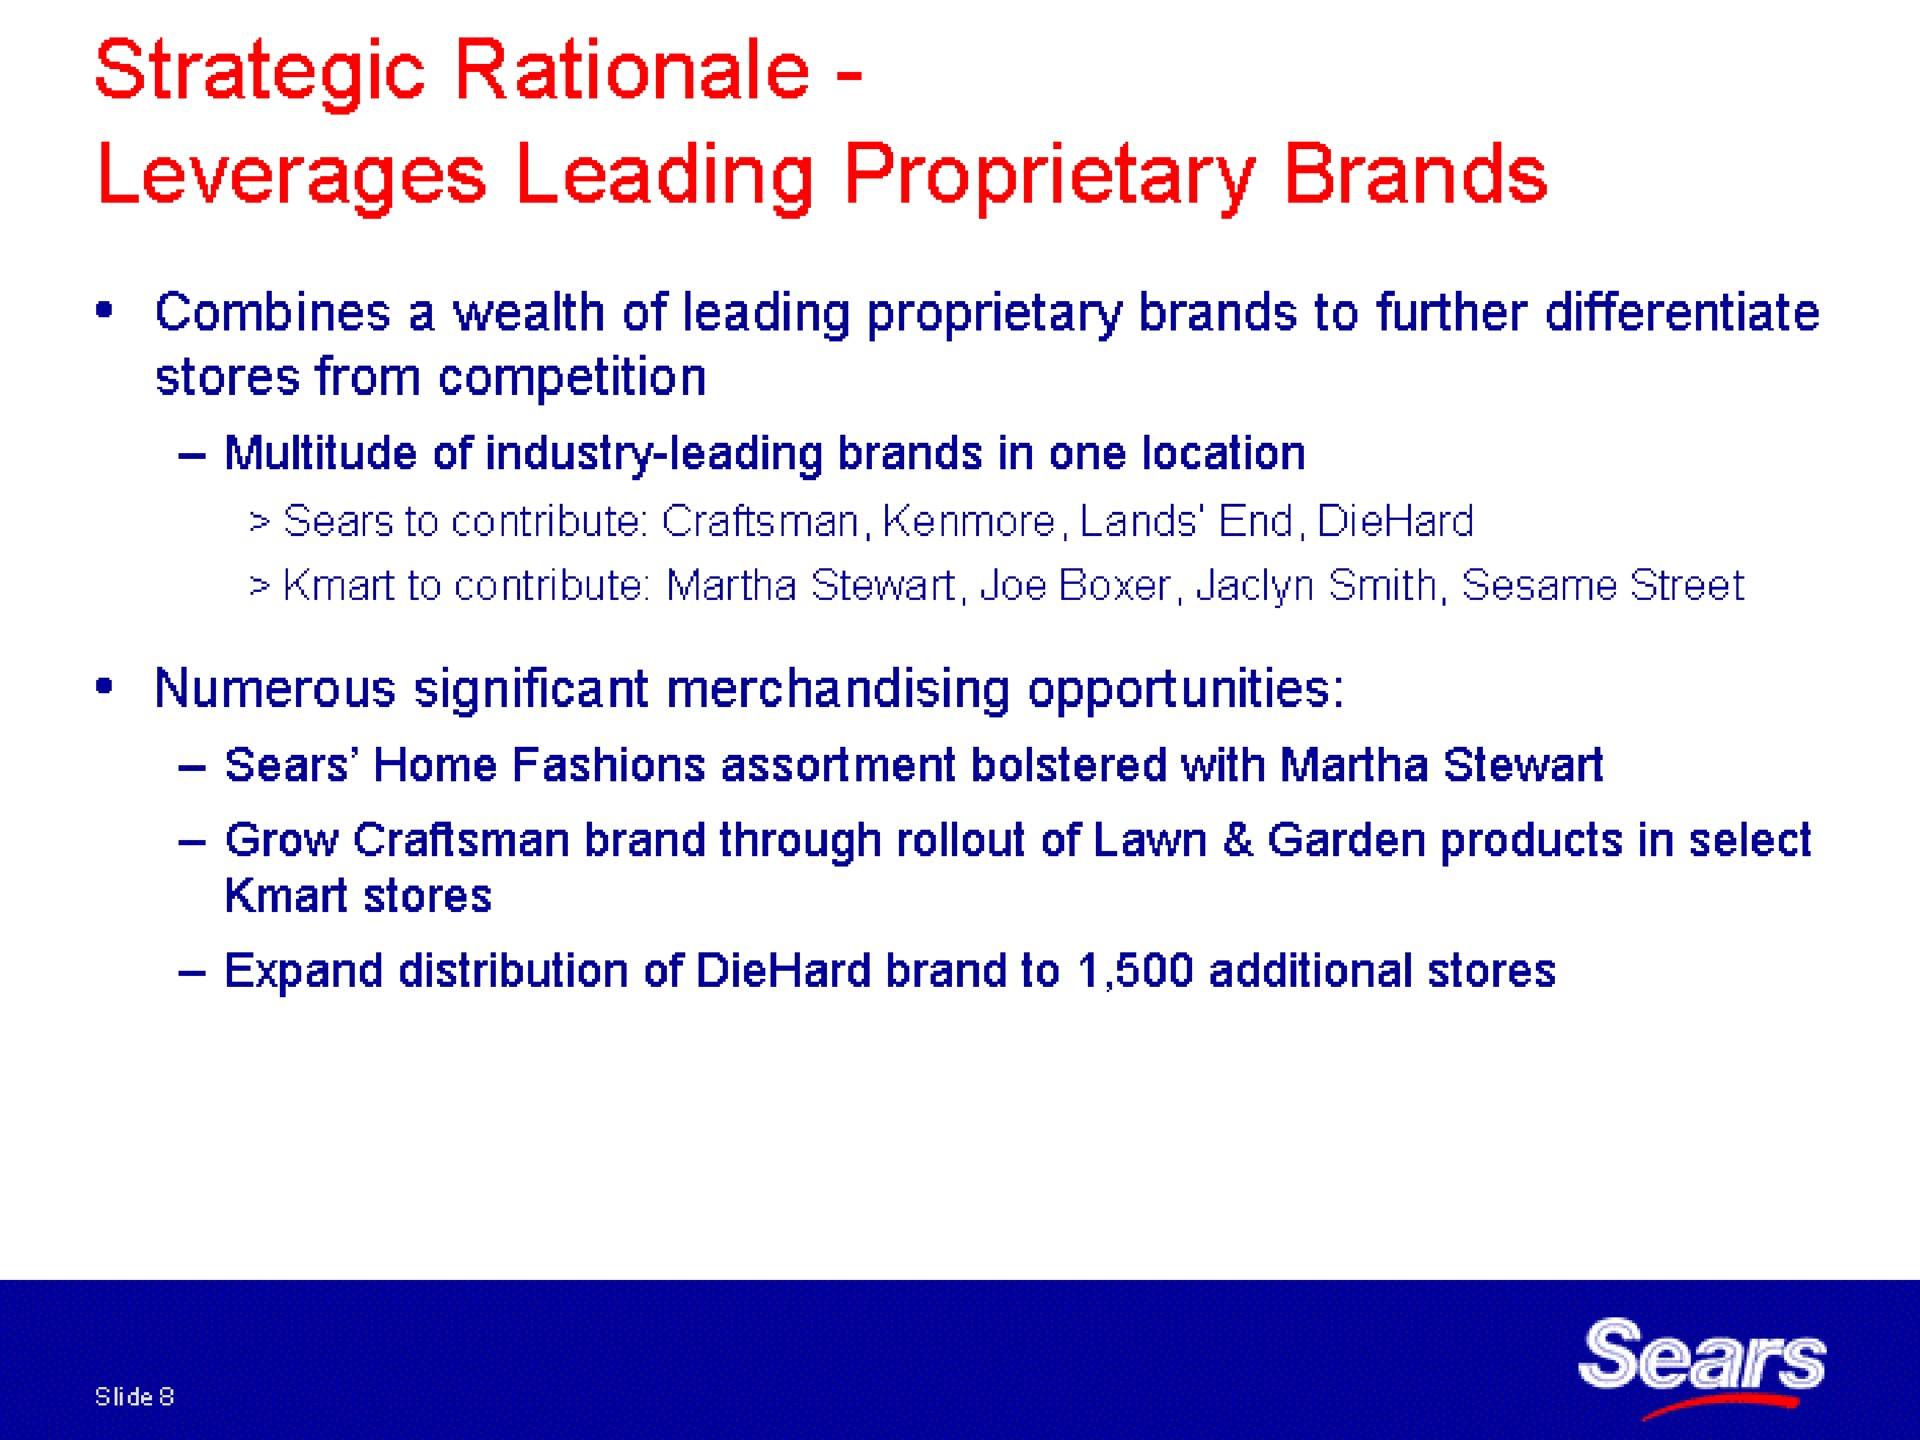 strategic rationale leverages leading proprietary brands | Sears